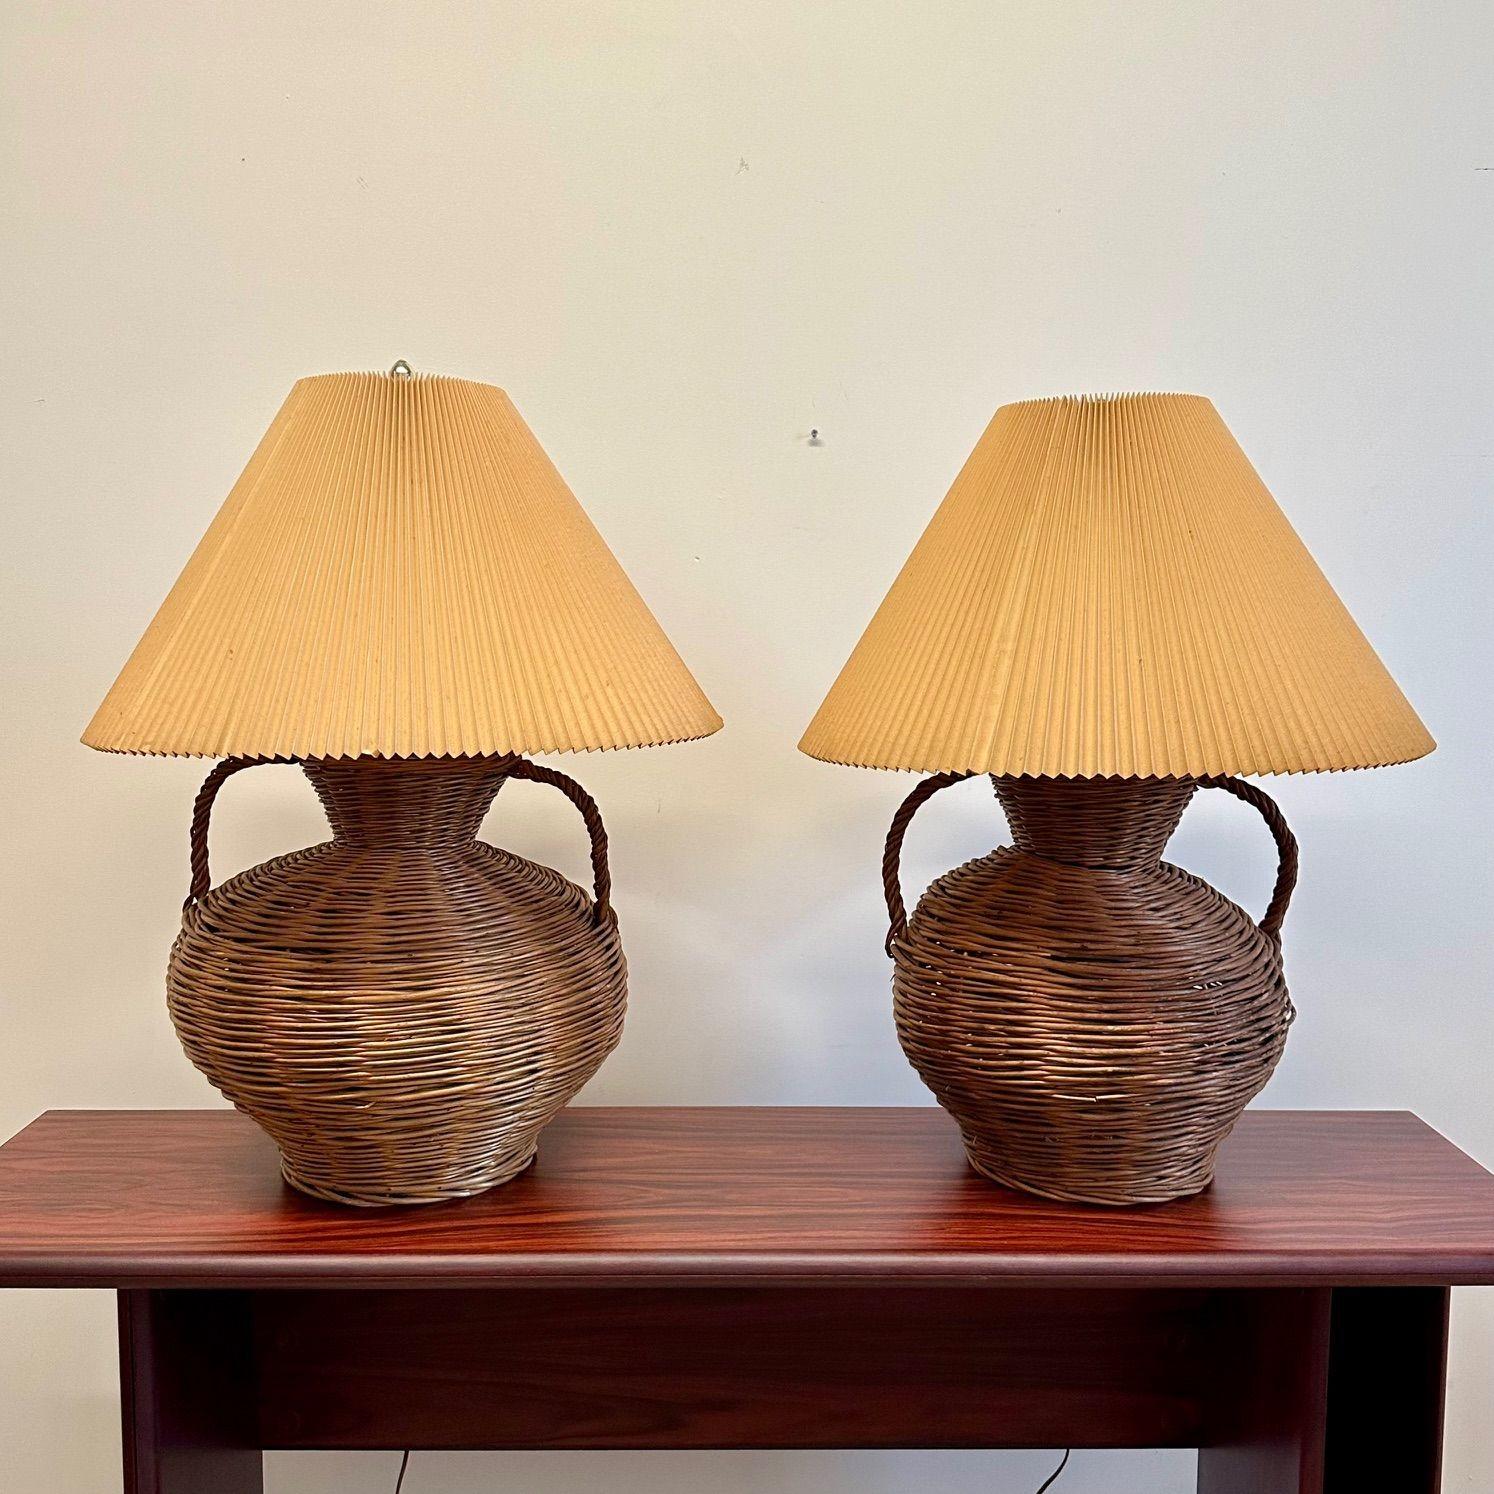 Large Mid-Century Modern Wicker Urn Table, Desk Lamps by Kovacs, Compatible Pair

Large scale boho chic wicker table lamps by Kovacs having their original paper shades. The wicker form body is in the shape of a large urn; each lamp having two